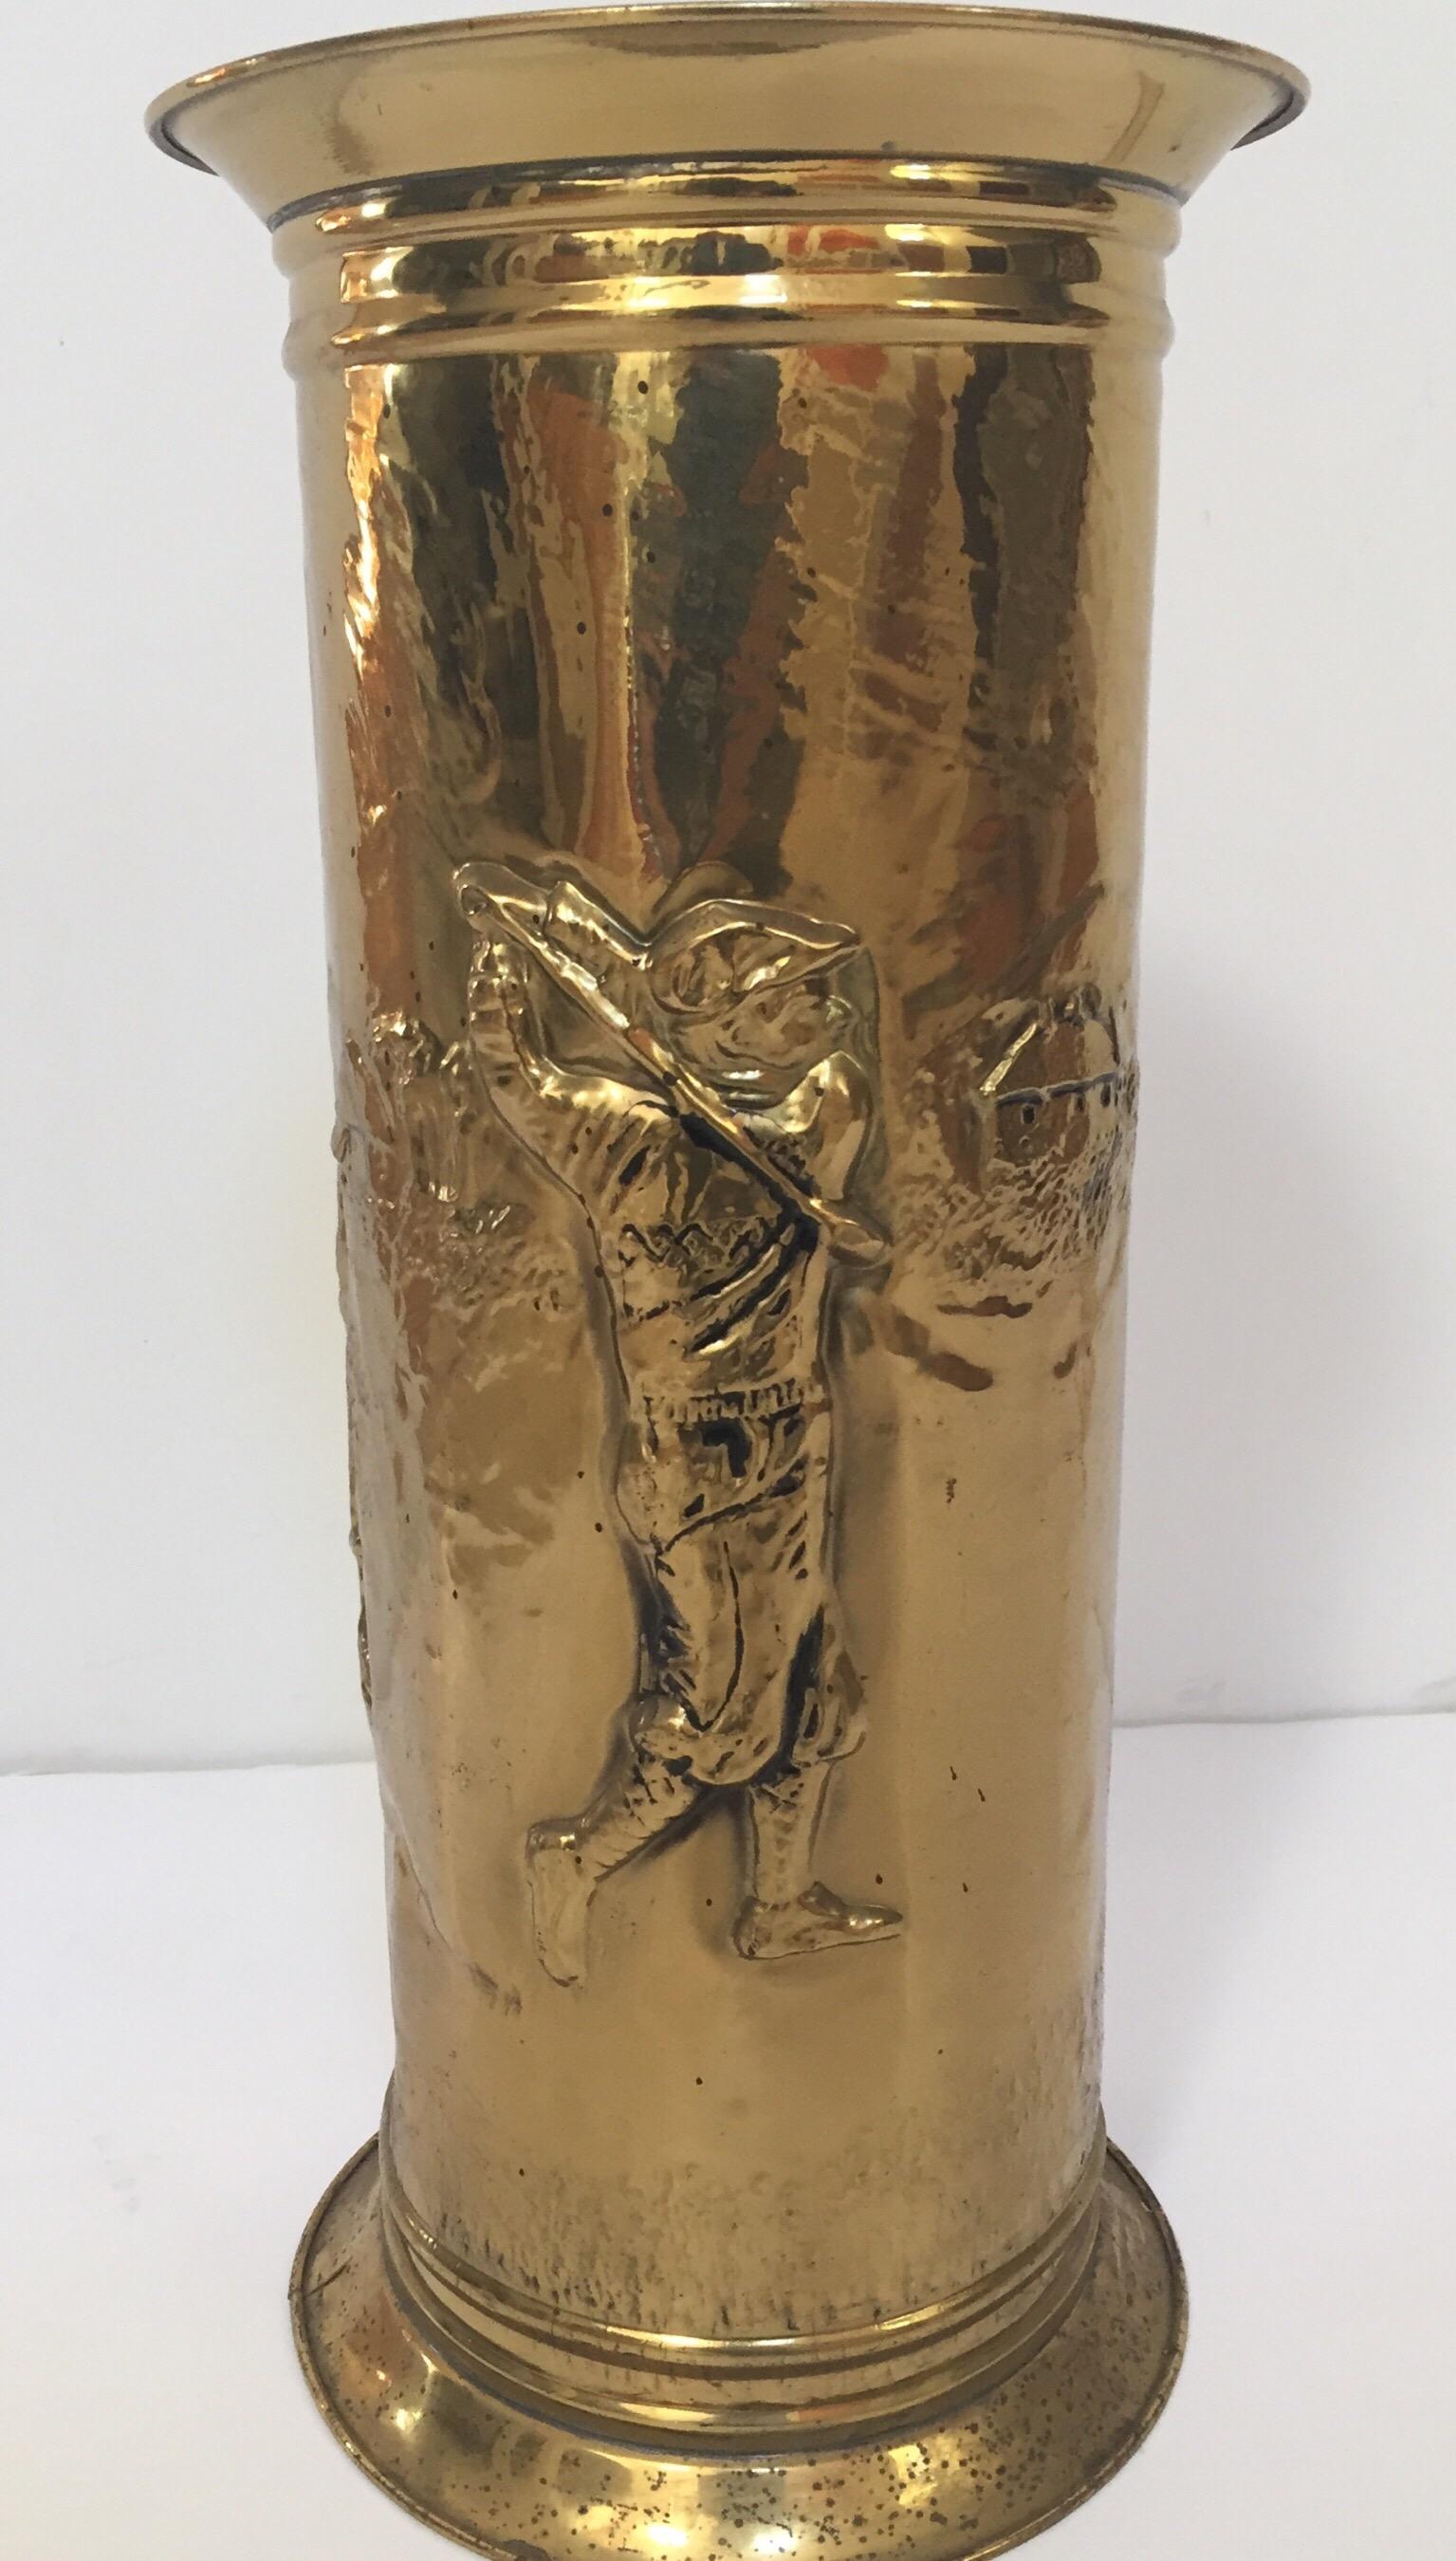 Victorian style umbrella stand in brass polished to hold either walking sticks or umbrellas.
Brass valet rack with a cylinder form, handcrafted in Birmingham England by English craftsmen.
Figure of a man golfing.
The brass has been lacquered to